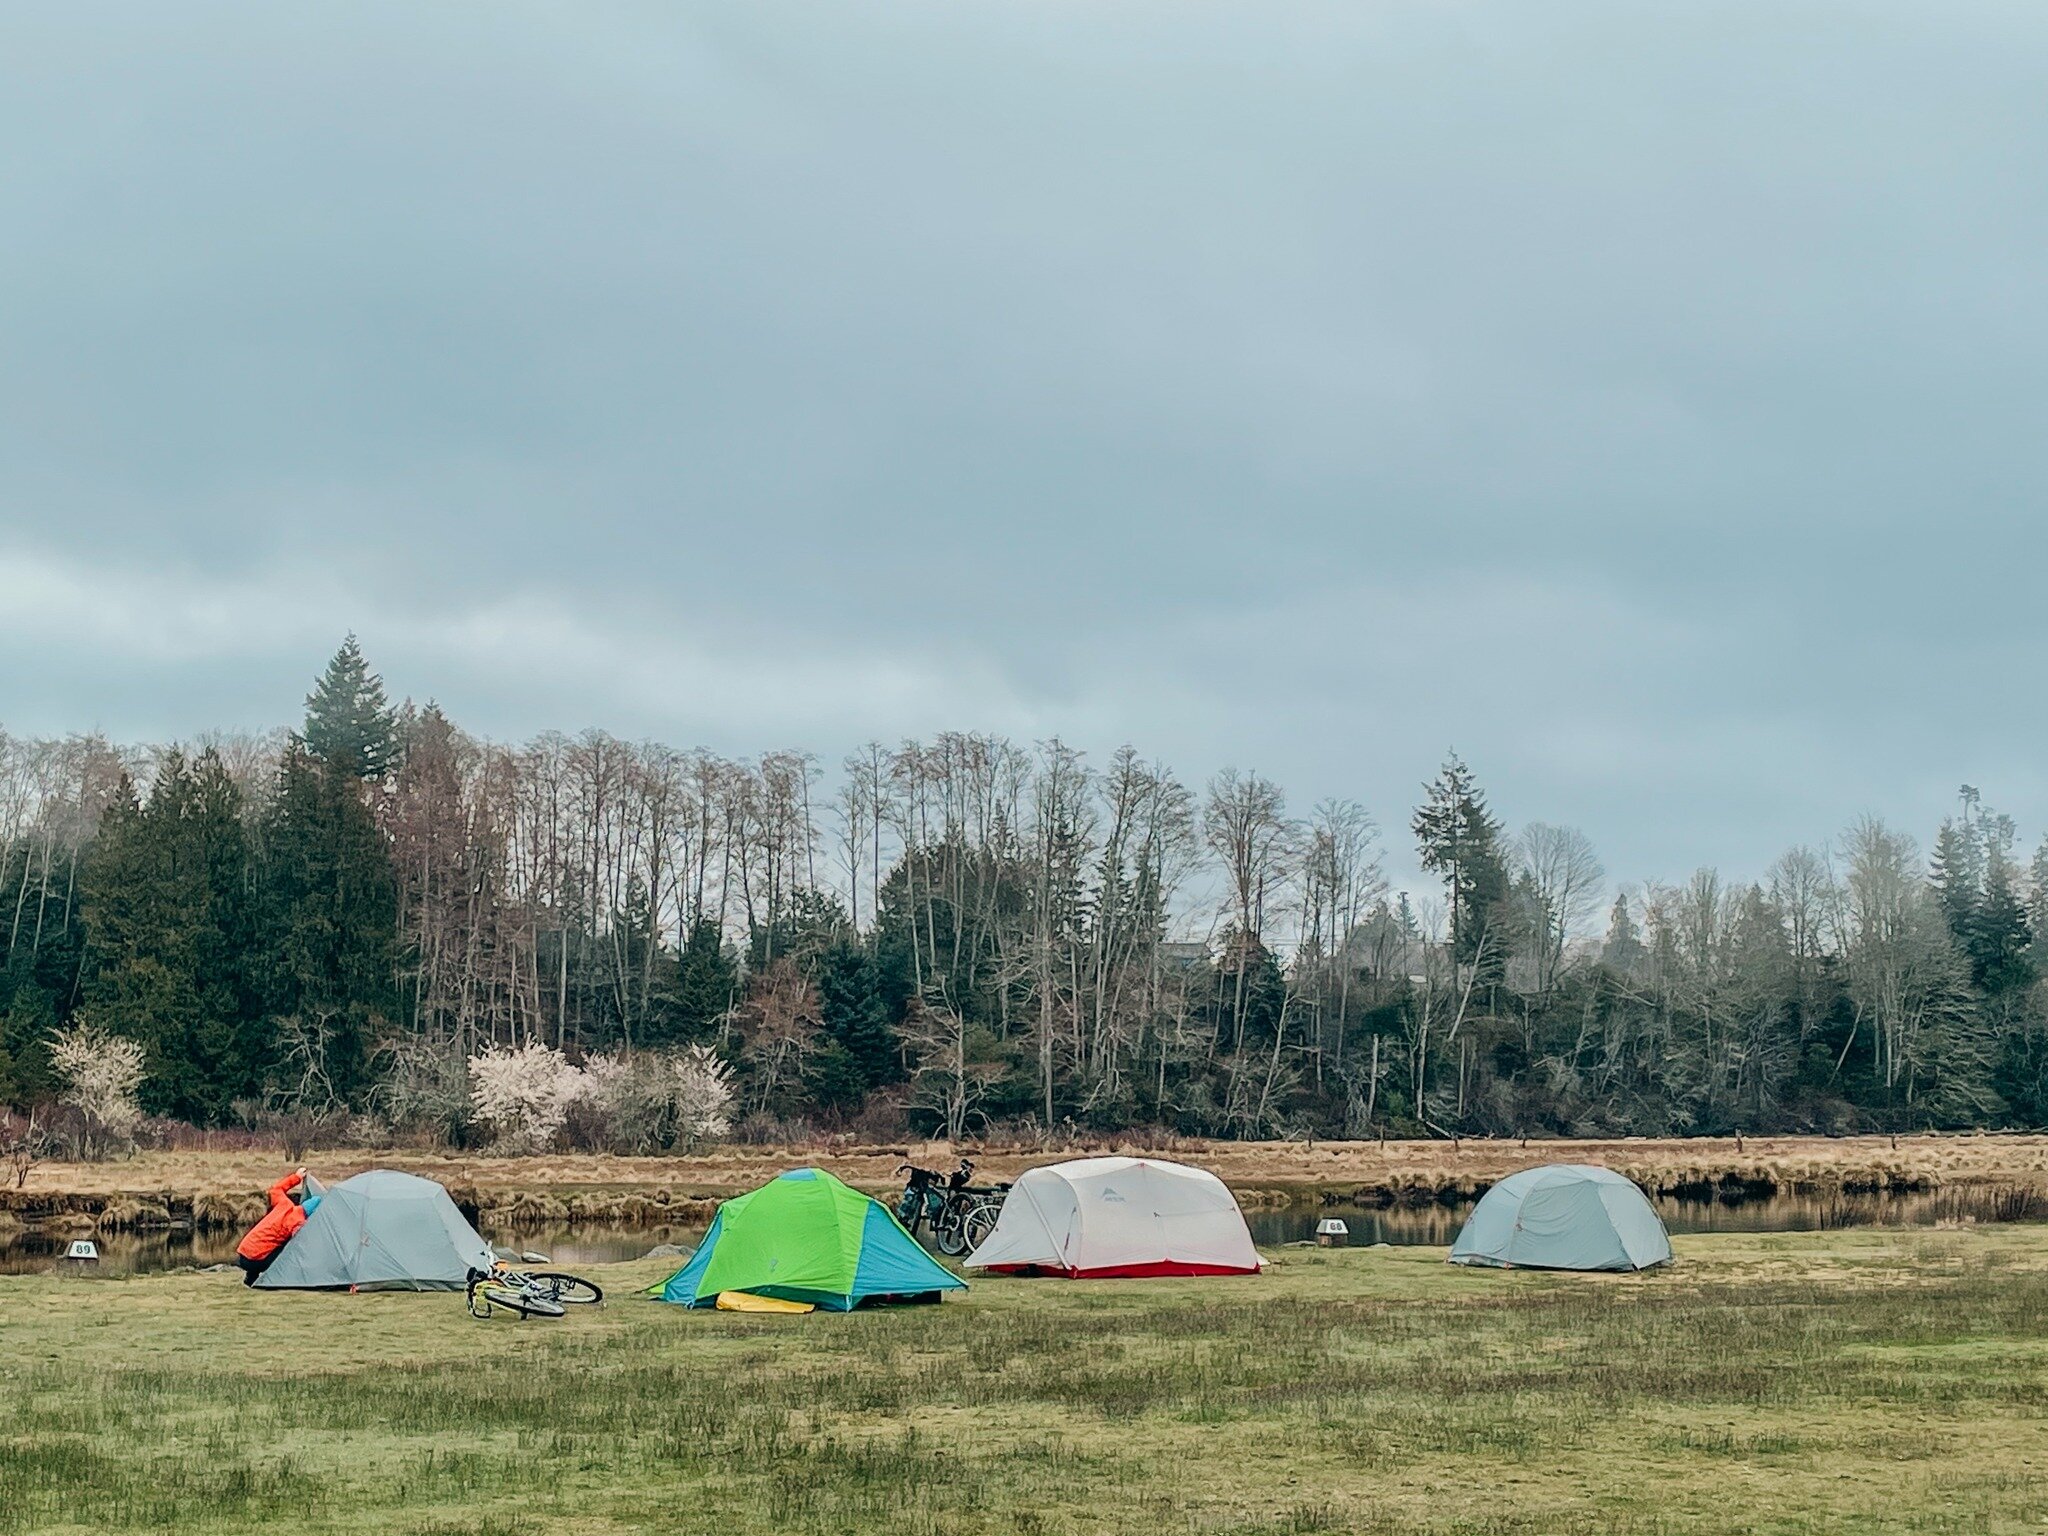 Camping is a great way to escape the crazy rush of city life. Get some friends together, pack your bags and go out camping this long weekend! There are plenty of amazing campsites all around BC.
.
#bikepacking #britishcolumbia #travel #nature #advent